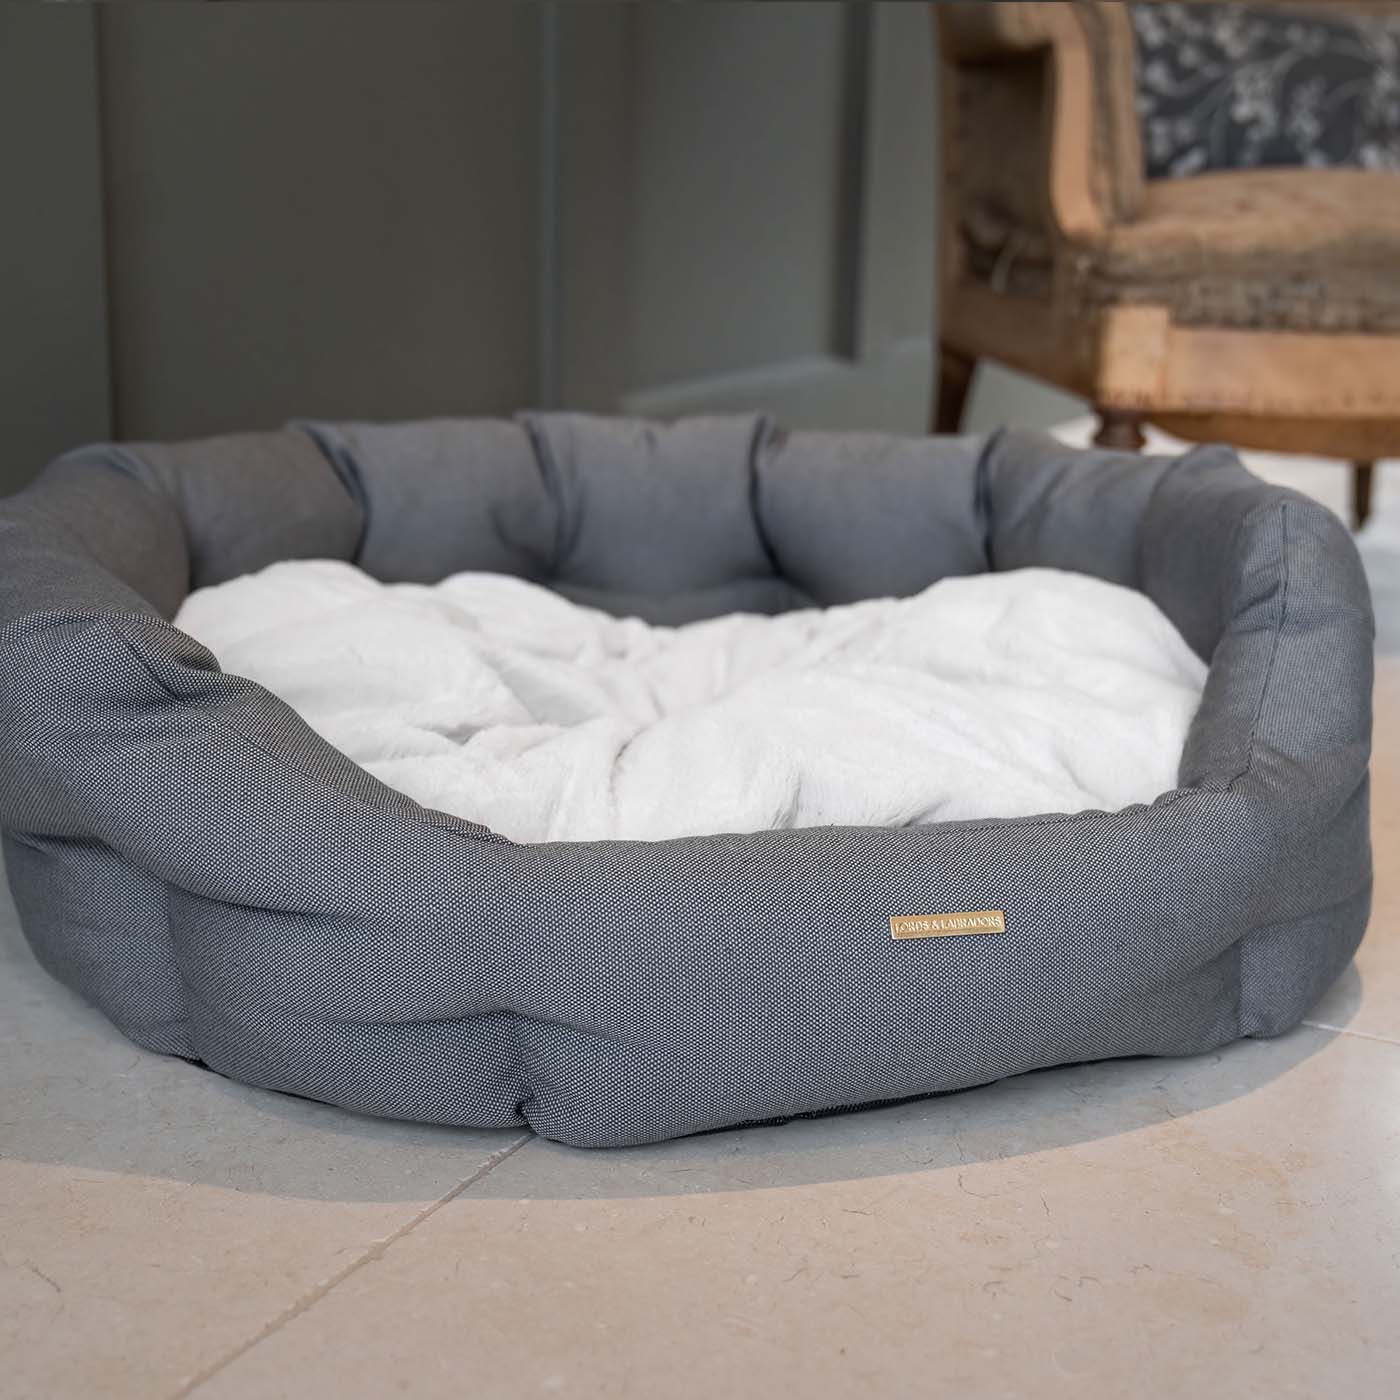 Discover our luxury twill oval dog bed in beautiful sandstone, the ideal choice for dogs to enjoy blissful nap-time, featuring reversible inner cushion with raised sides for dogs who love to rest their head for the ultimate cosiness! Handcrafted in Italy for pure pet luxury! Available now at Lords & Labradors    